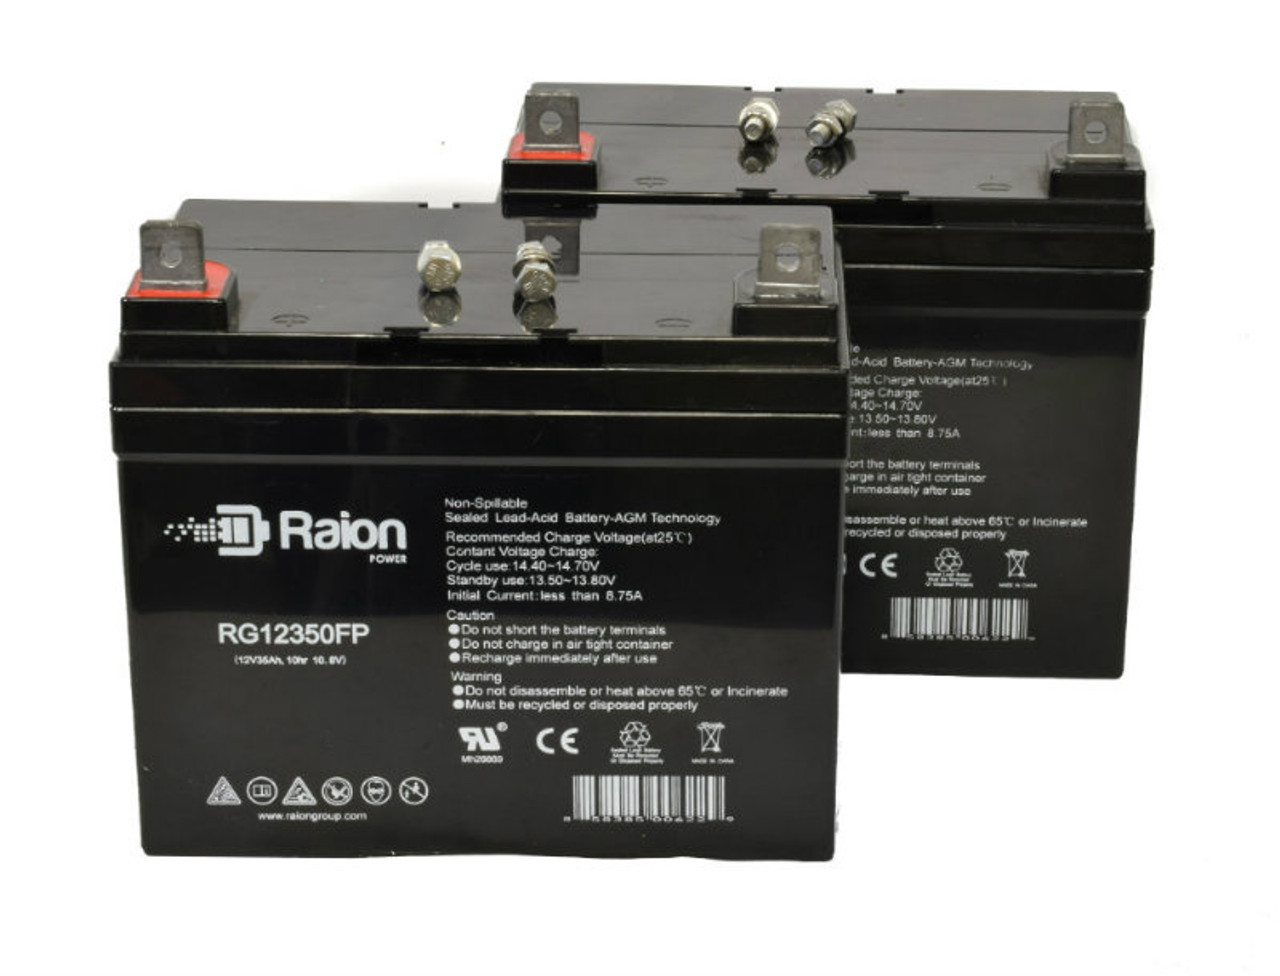 Raion Power Replacement 12V 35Ah Lawn Mower Battery for Toro 30177 - 2 Pack